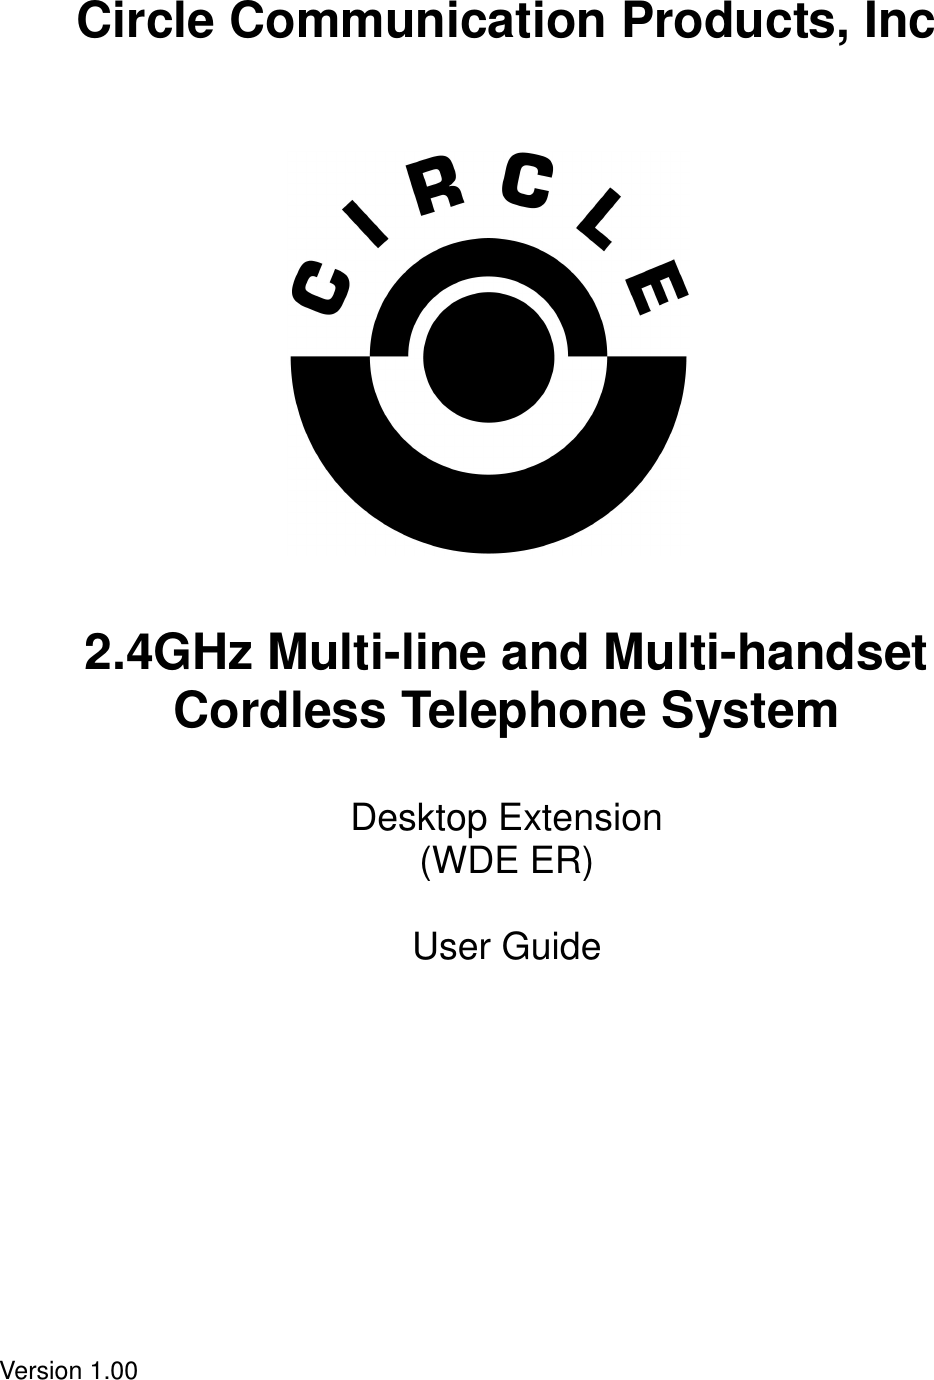  Circle Communication Products, Inc                     2.4GHz Multi-line and Multi-handset Cordless Telephone System   Desktop Extension   (WDE ER)  User Guide              Version 1.00  